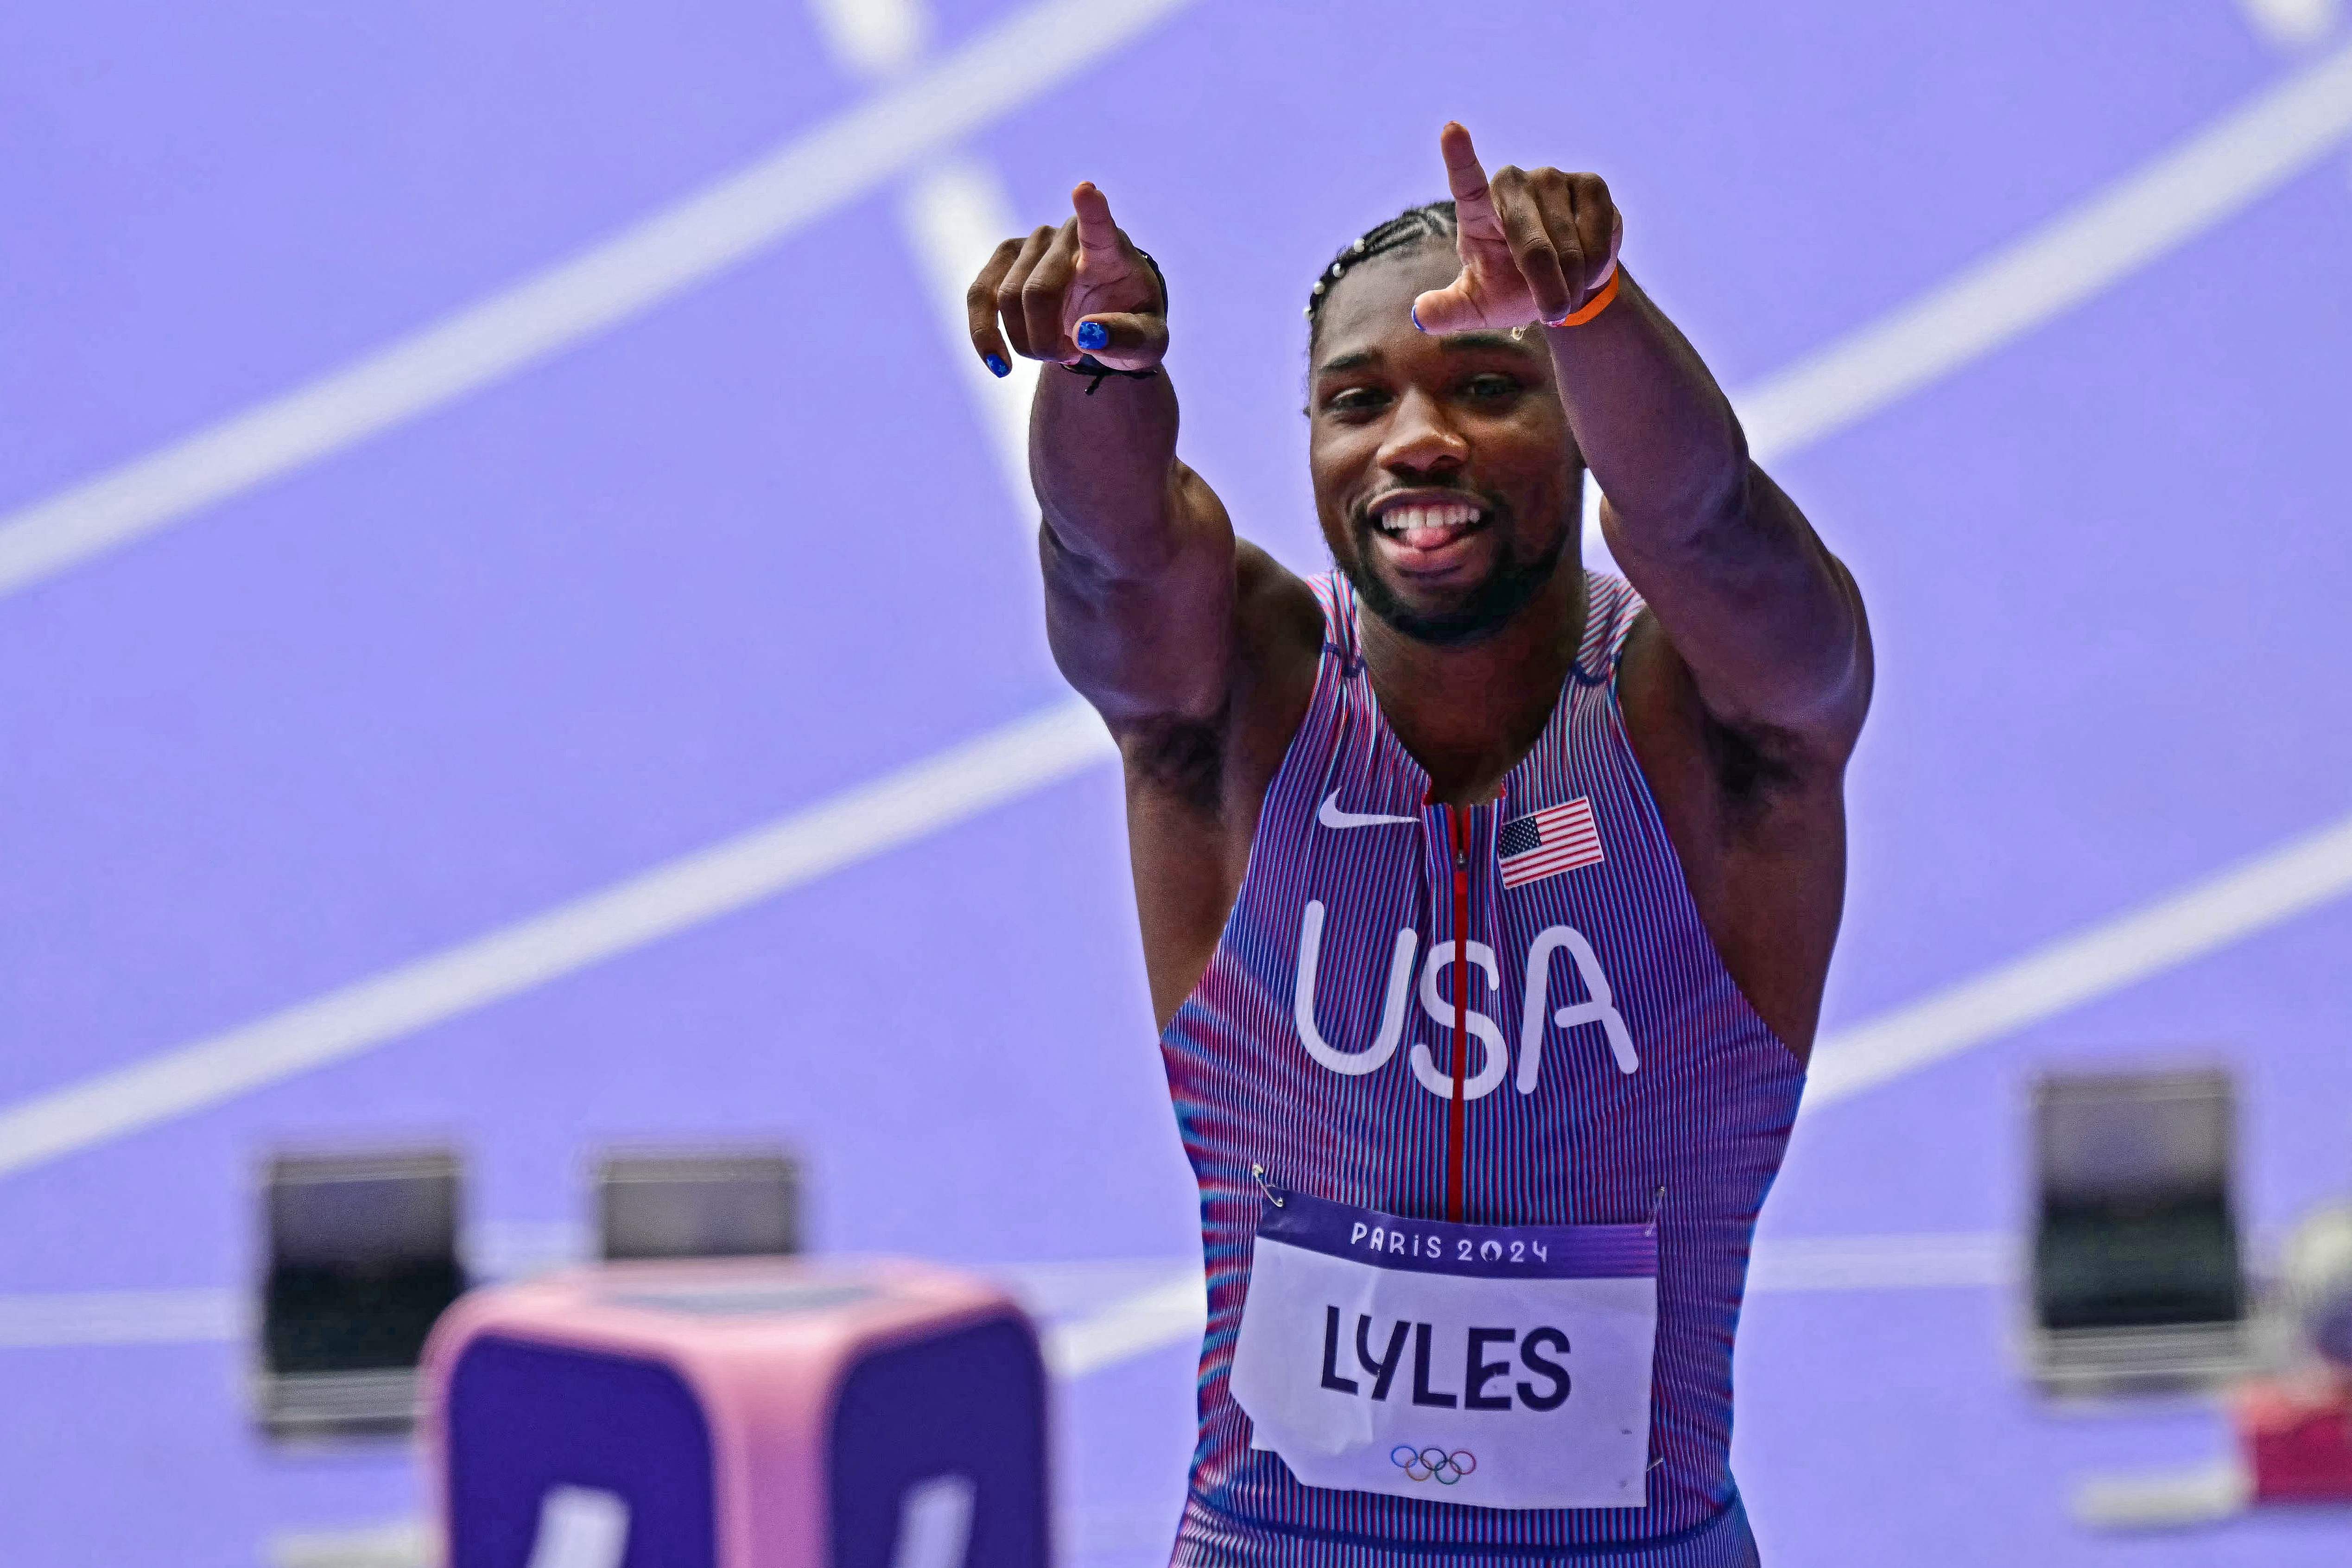 US' Noah Lyles reacts after competing in the men's 100m heat of the athletics event at the Paris 2024 Olympic Games at Stade de France in Saint-Denis, north of Paris, on August 3, 2024. (Photo by Martin  BERNETTI / AFP)